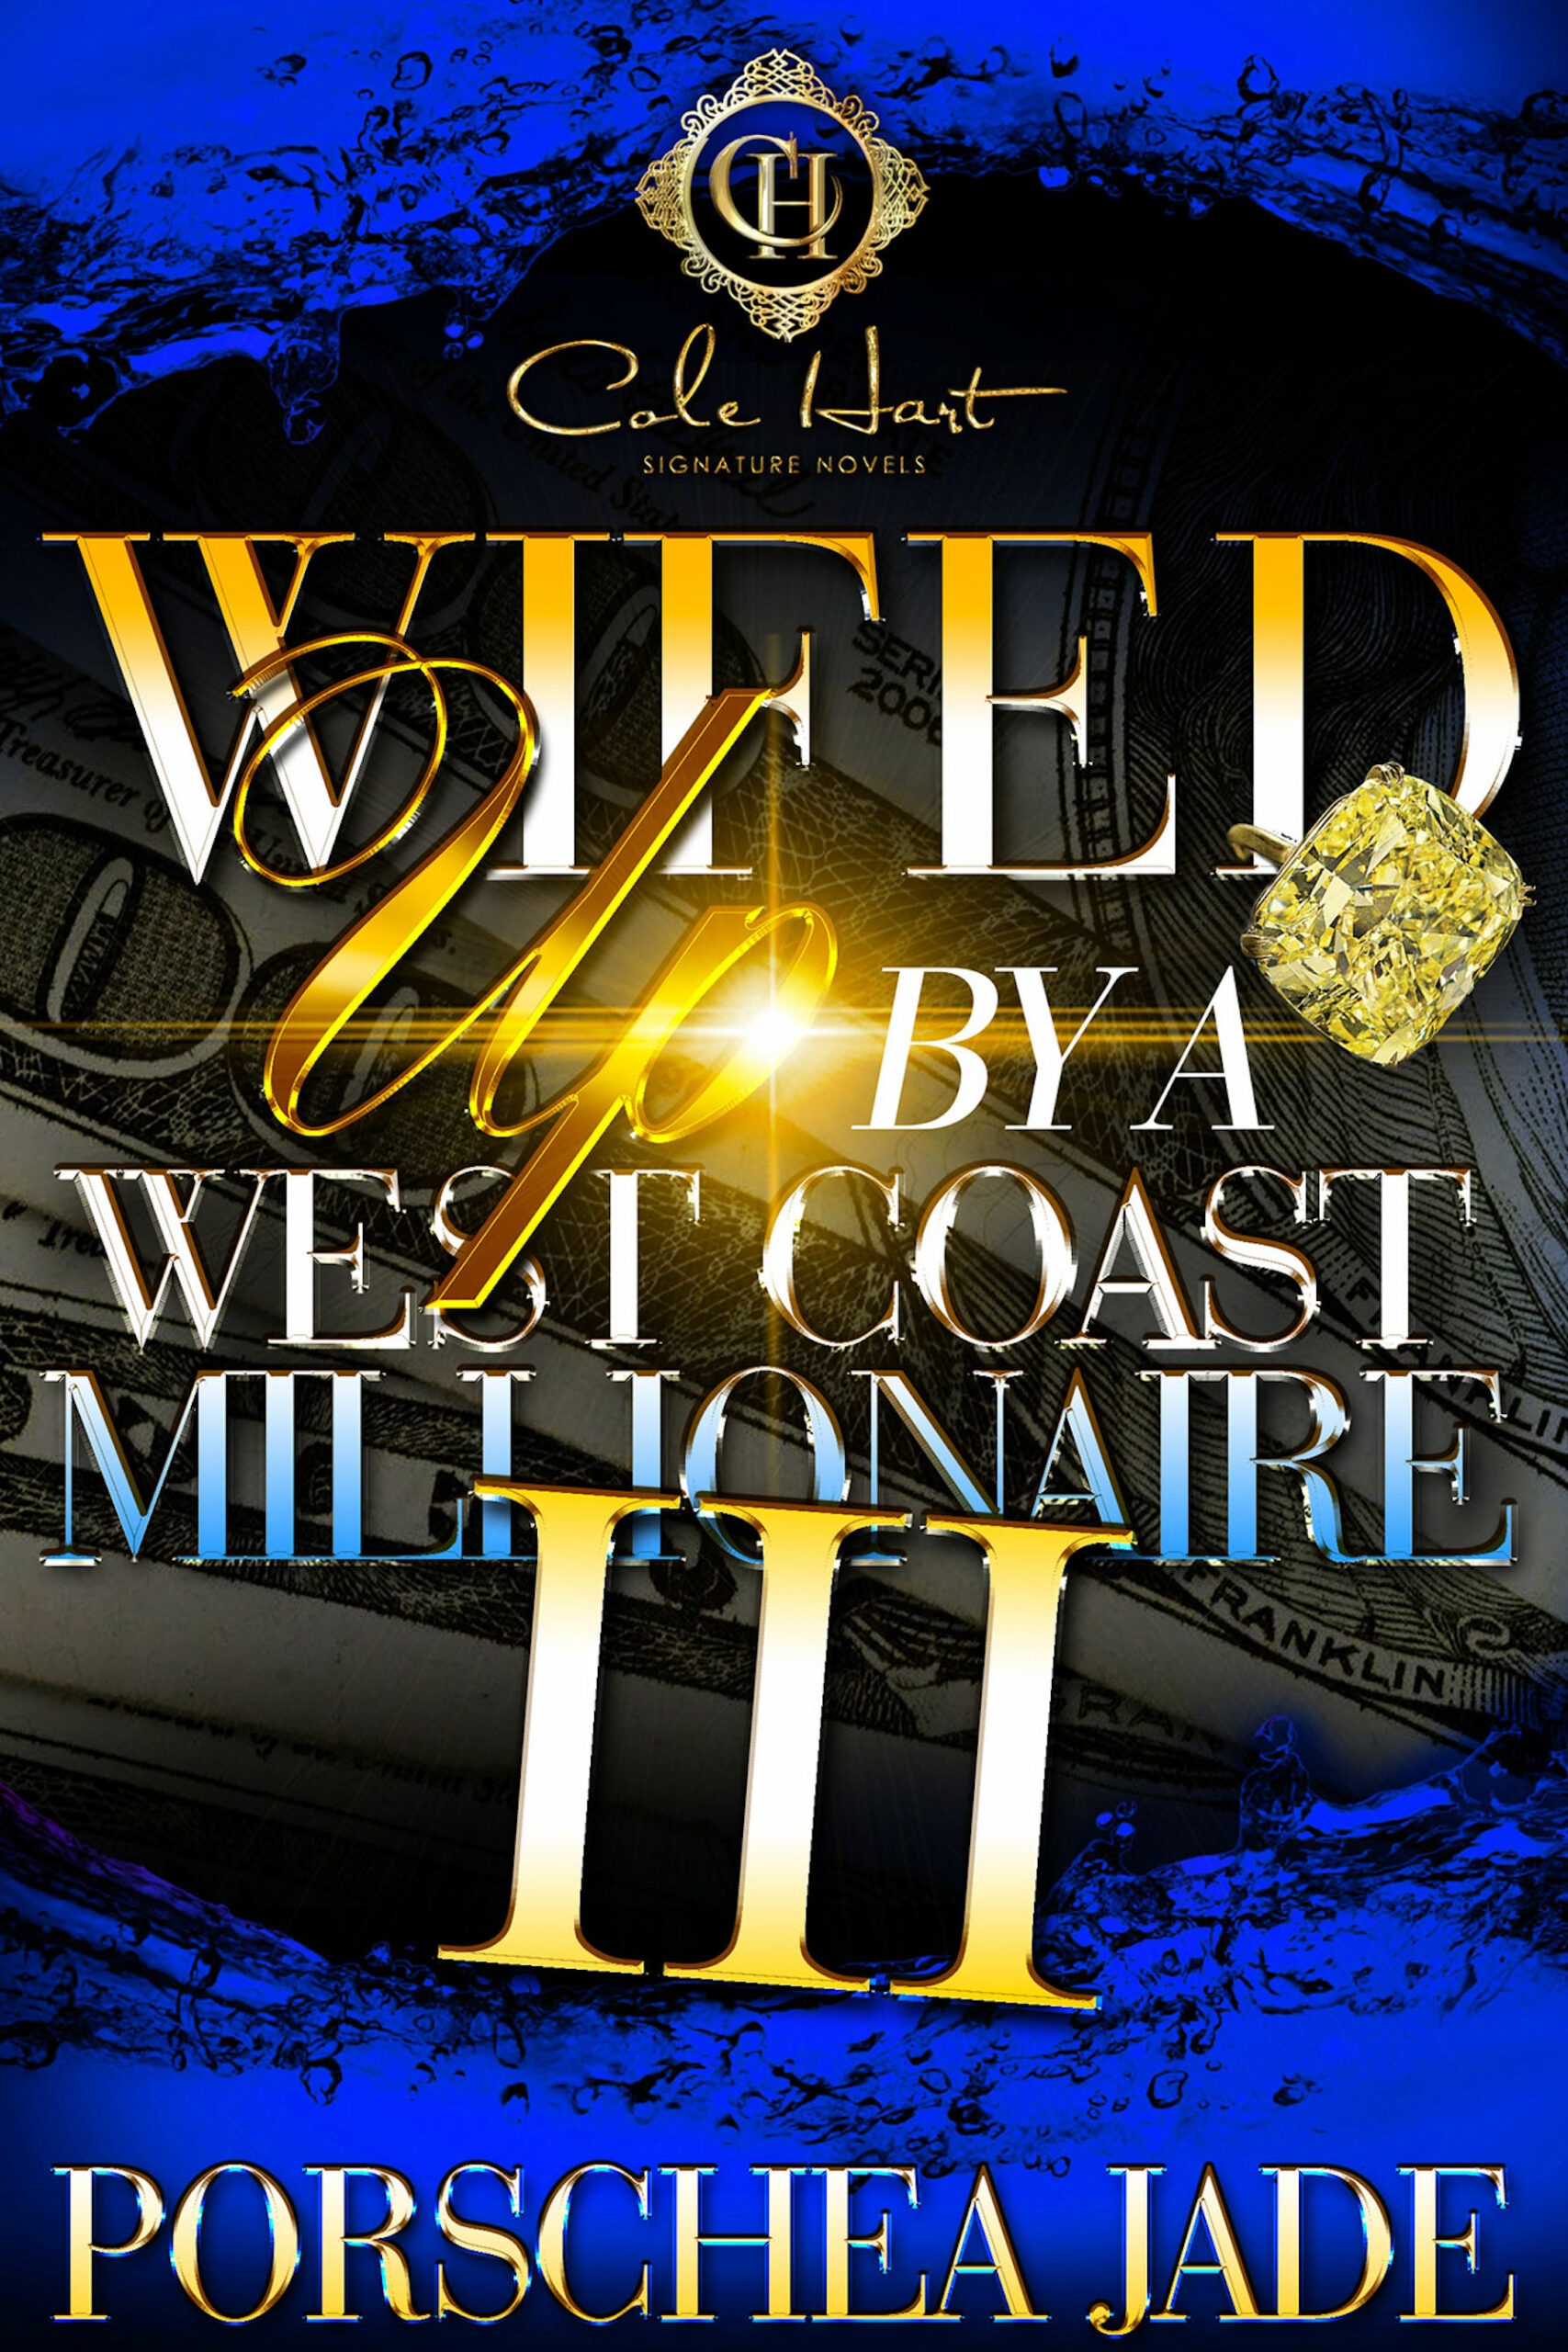 Wifed Up By A West Coast Millionaire 3